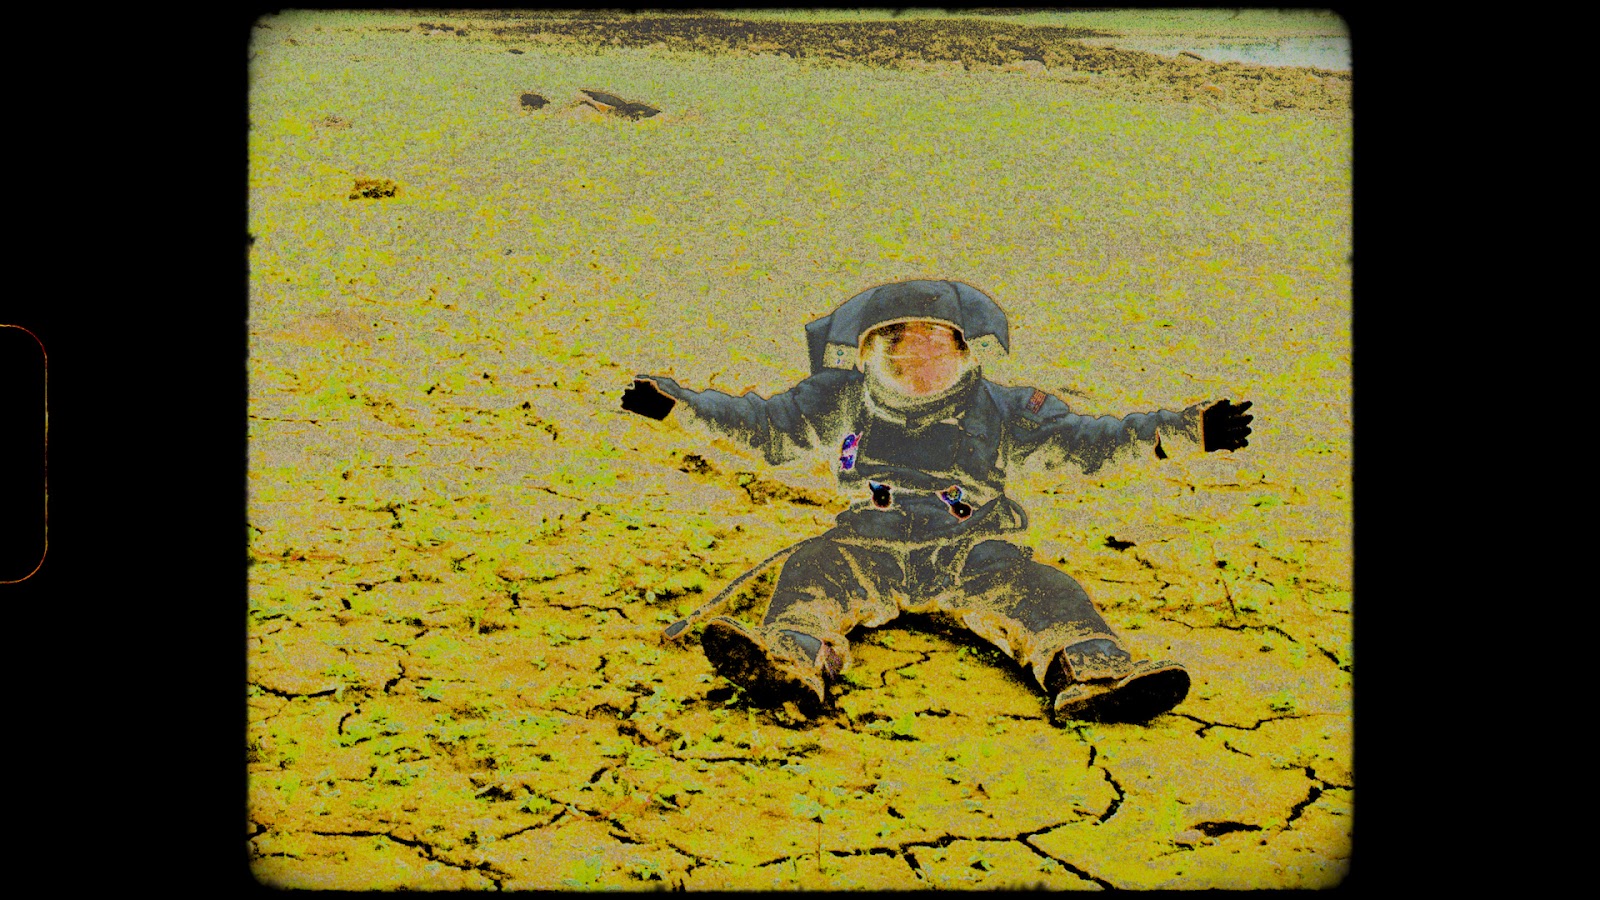 From the film Notes from Eremocene, a person in a astronaut suit sits on the cracked earth, hands outstretched. Yellow particles cover the suit and surrounding environment.